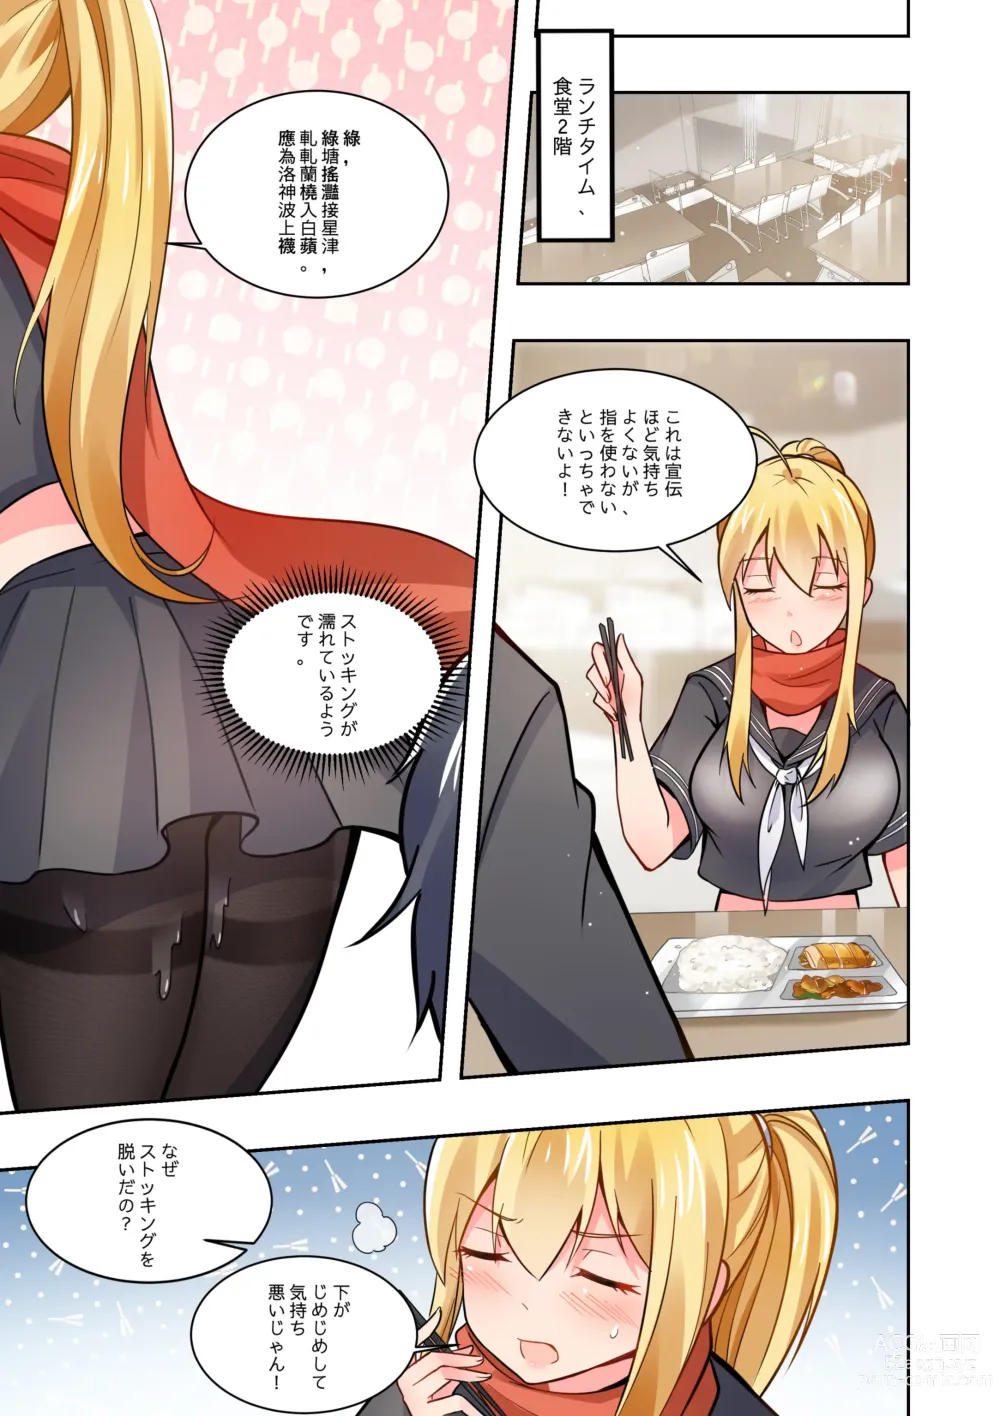 Page 24 of doujinshi ノーパン彼女